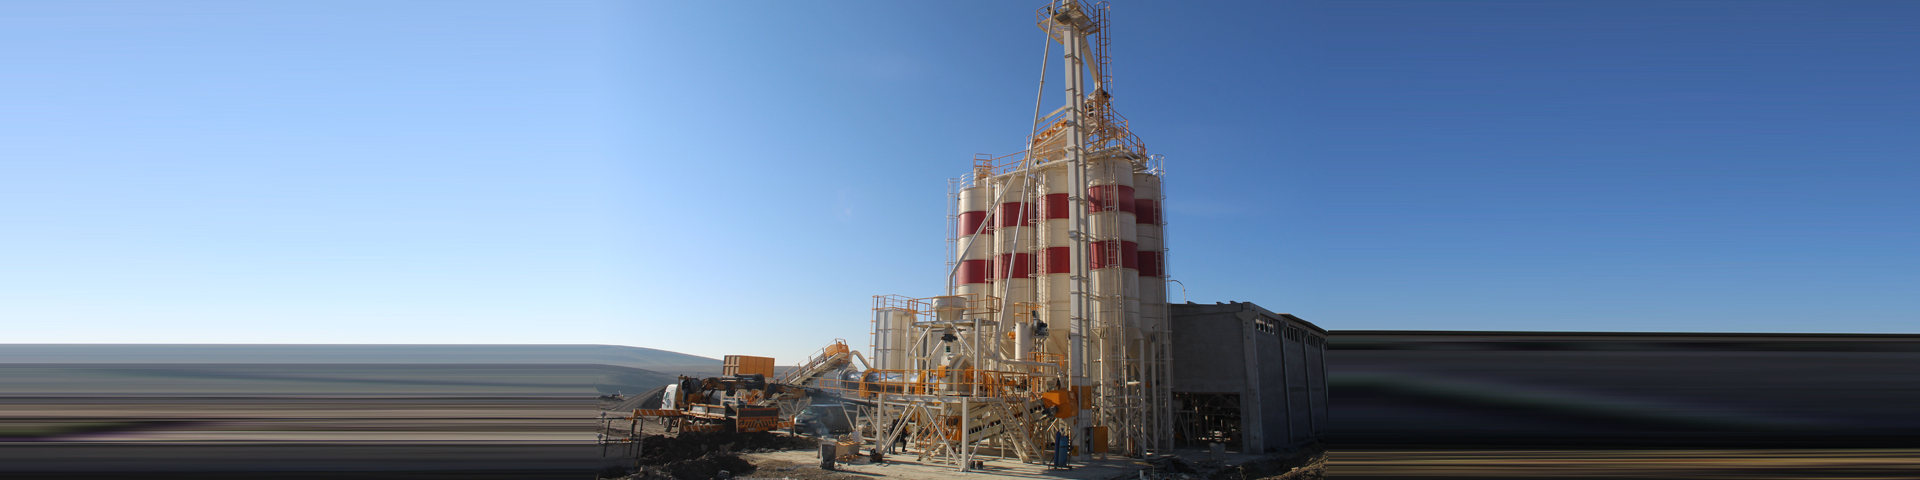 Dry mortar production plant.